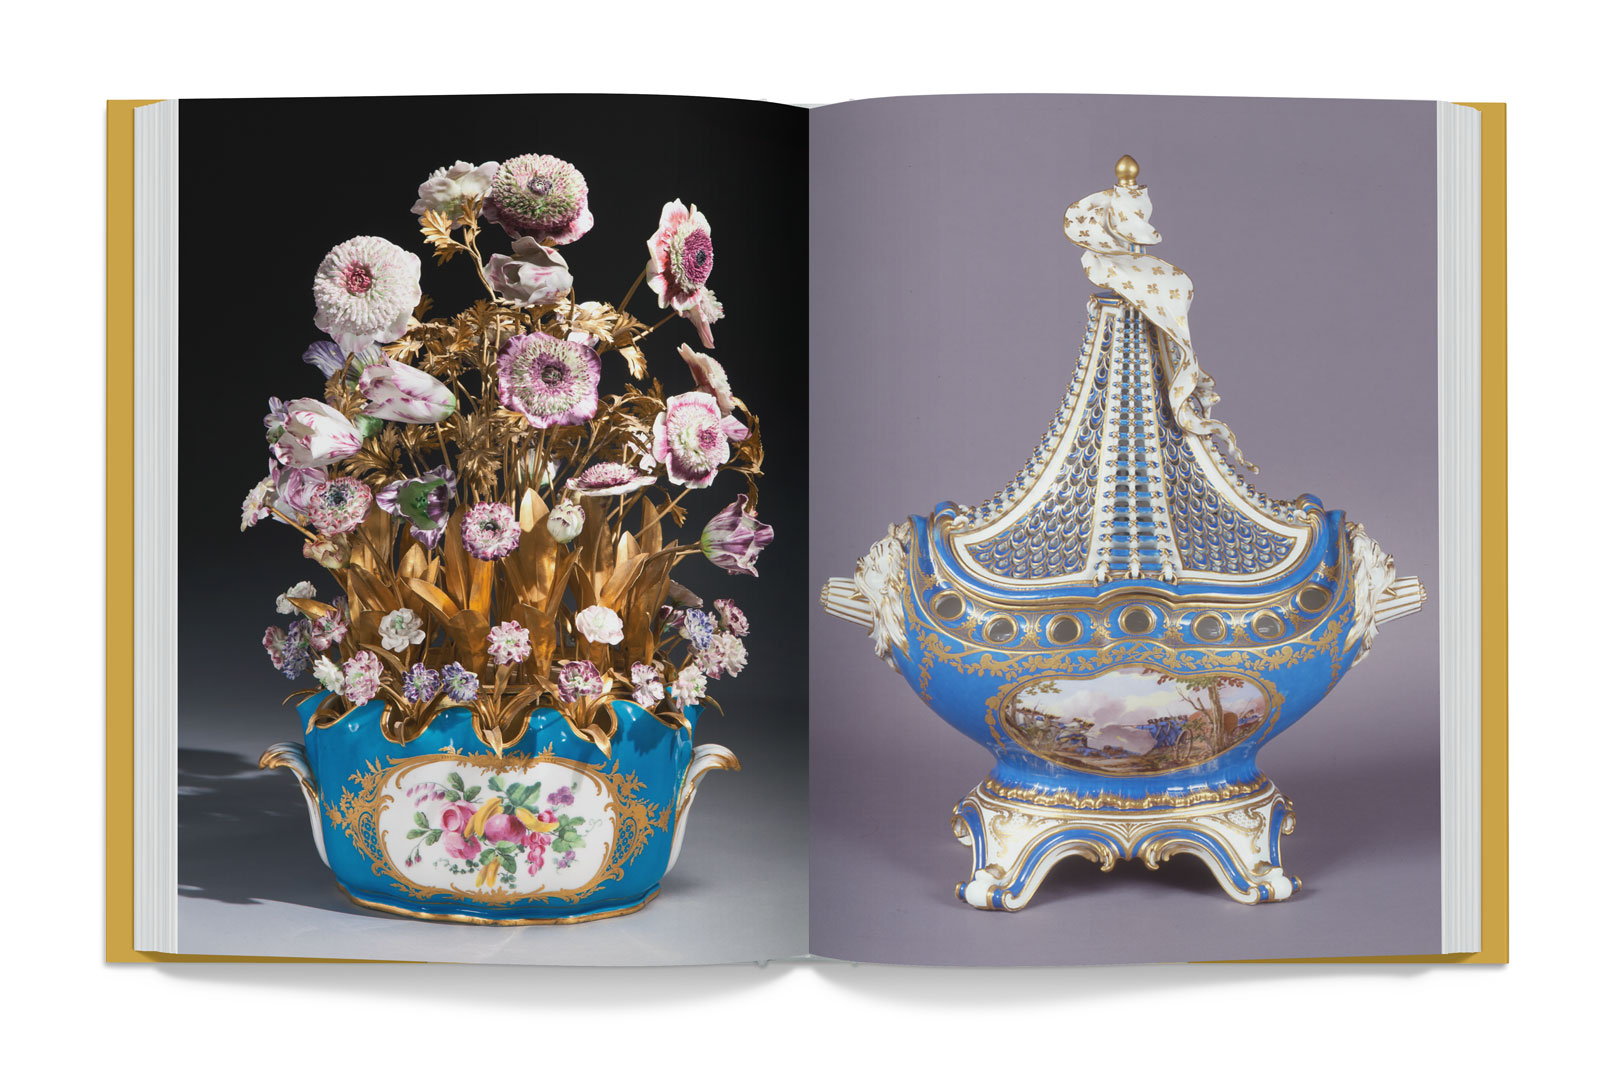 Vincennes and Sevres Porcelain in the Collections of the J. Paul Getty Museum